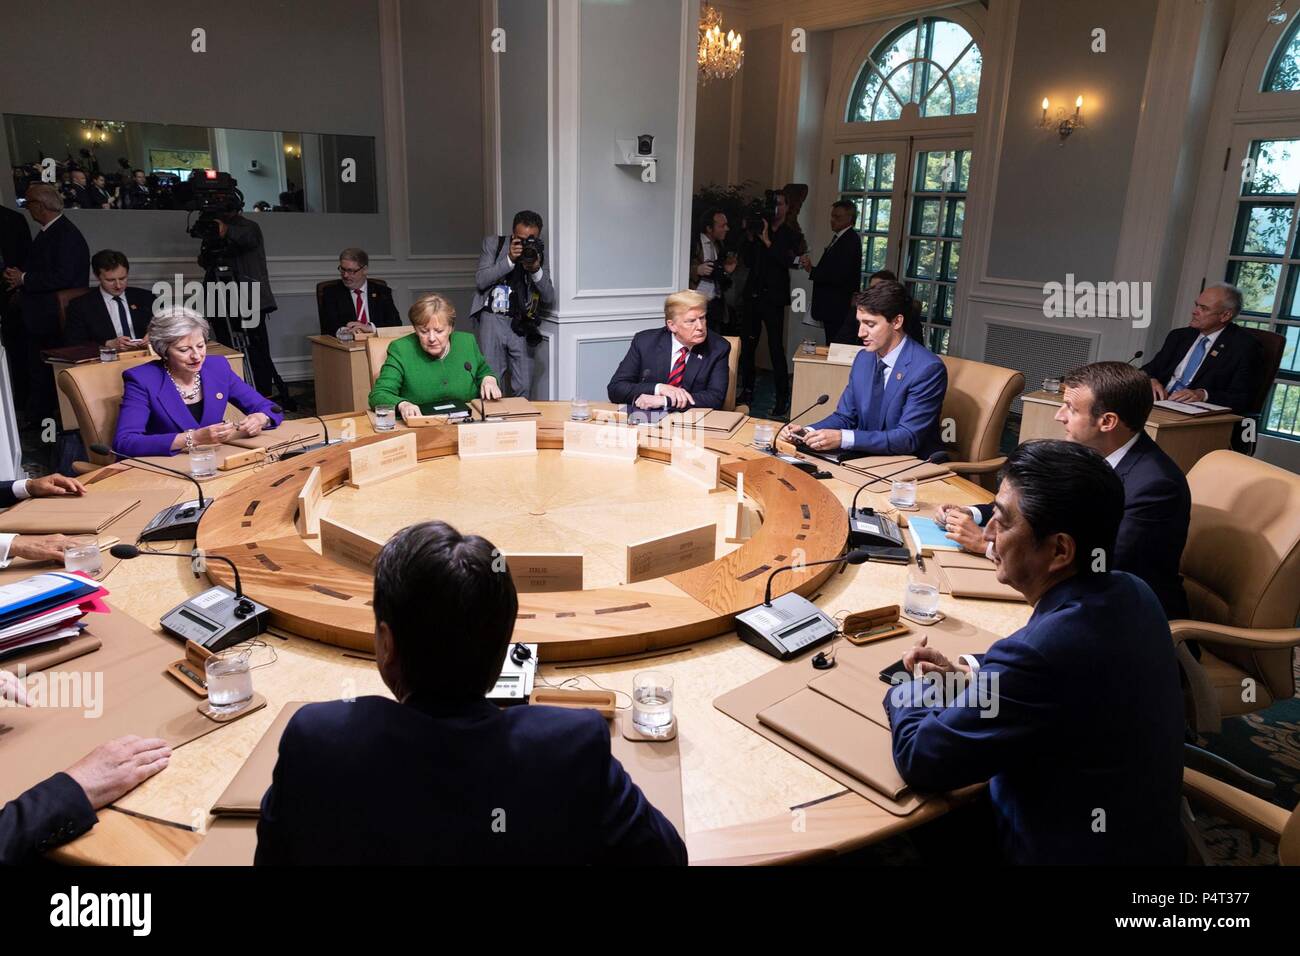 U.S. President Donald Trump and world leaders attends a working session of the Charlevoix G7 Summit June 8, 2018 in Charlevoix, Quebec, Canada. Sitting from left to right are:  British Prime Minister Theresa May, German Chancellor Angela Merkel, President Donald Trump, Canadian Prime Minister Justin Trudeau, French President Emmanuel Macron, Japanese Prime Minister Shinzo Abe and Italian Prime Minister Giuseppe Conte. Stock Photo